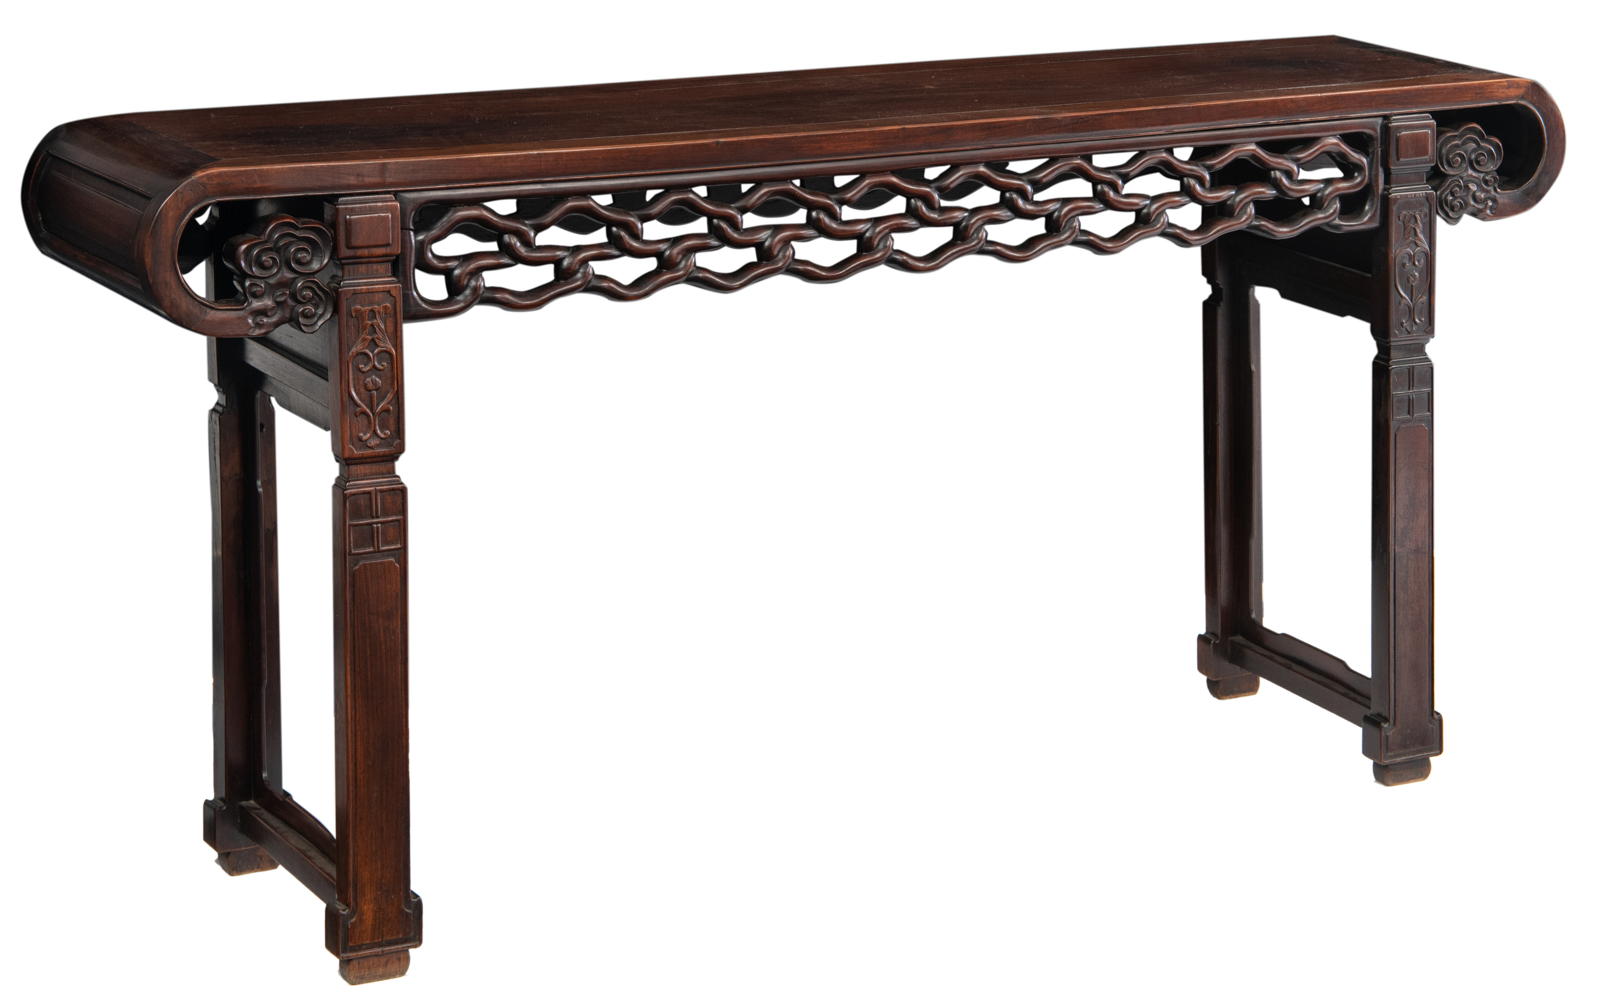 An imposing Chinese rosewood sideboard, with richly carved openwork decoration, H 93 - W 196 - D 45